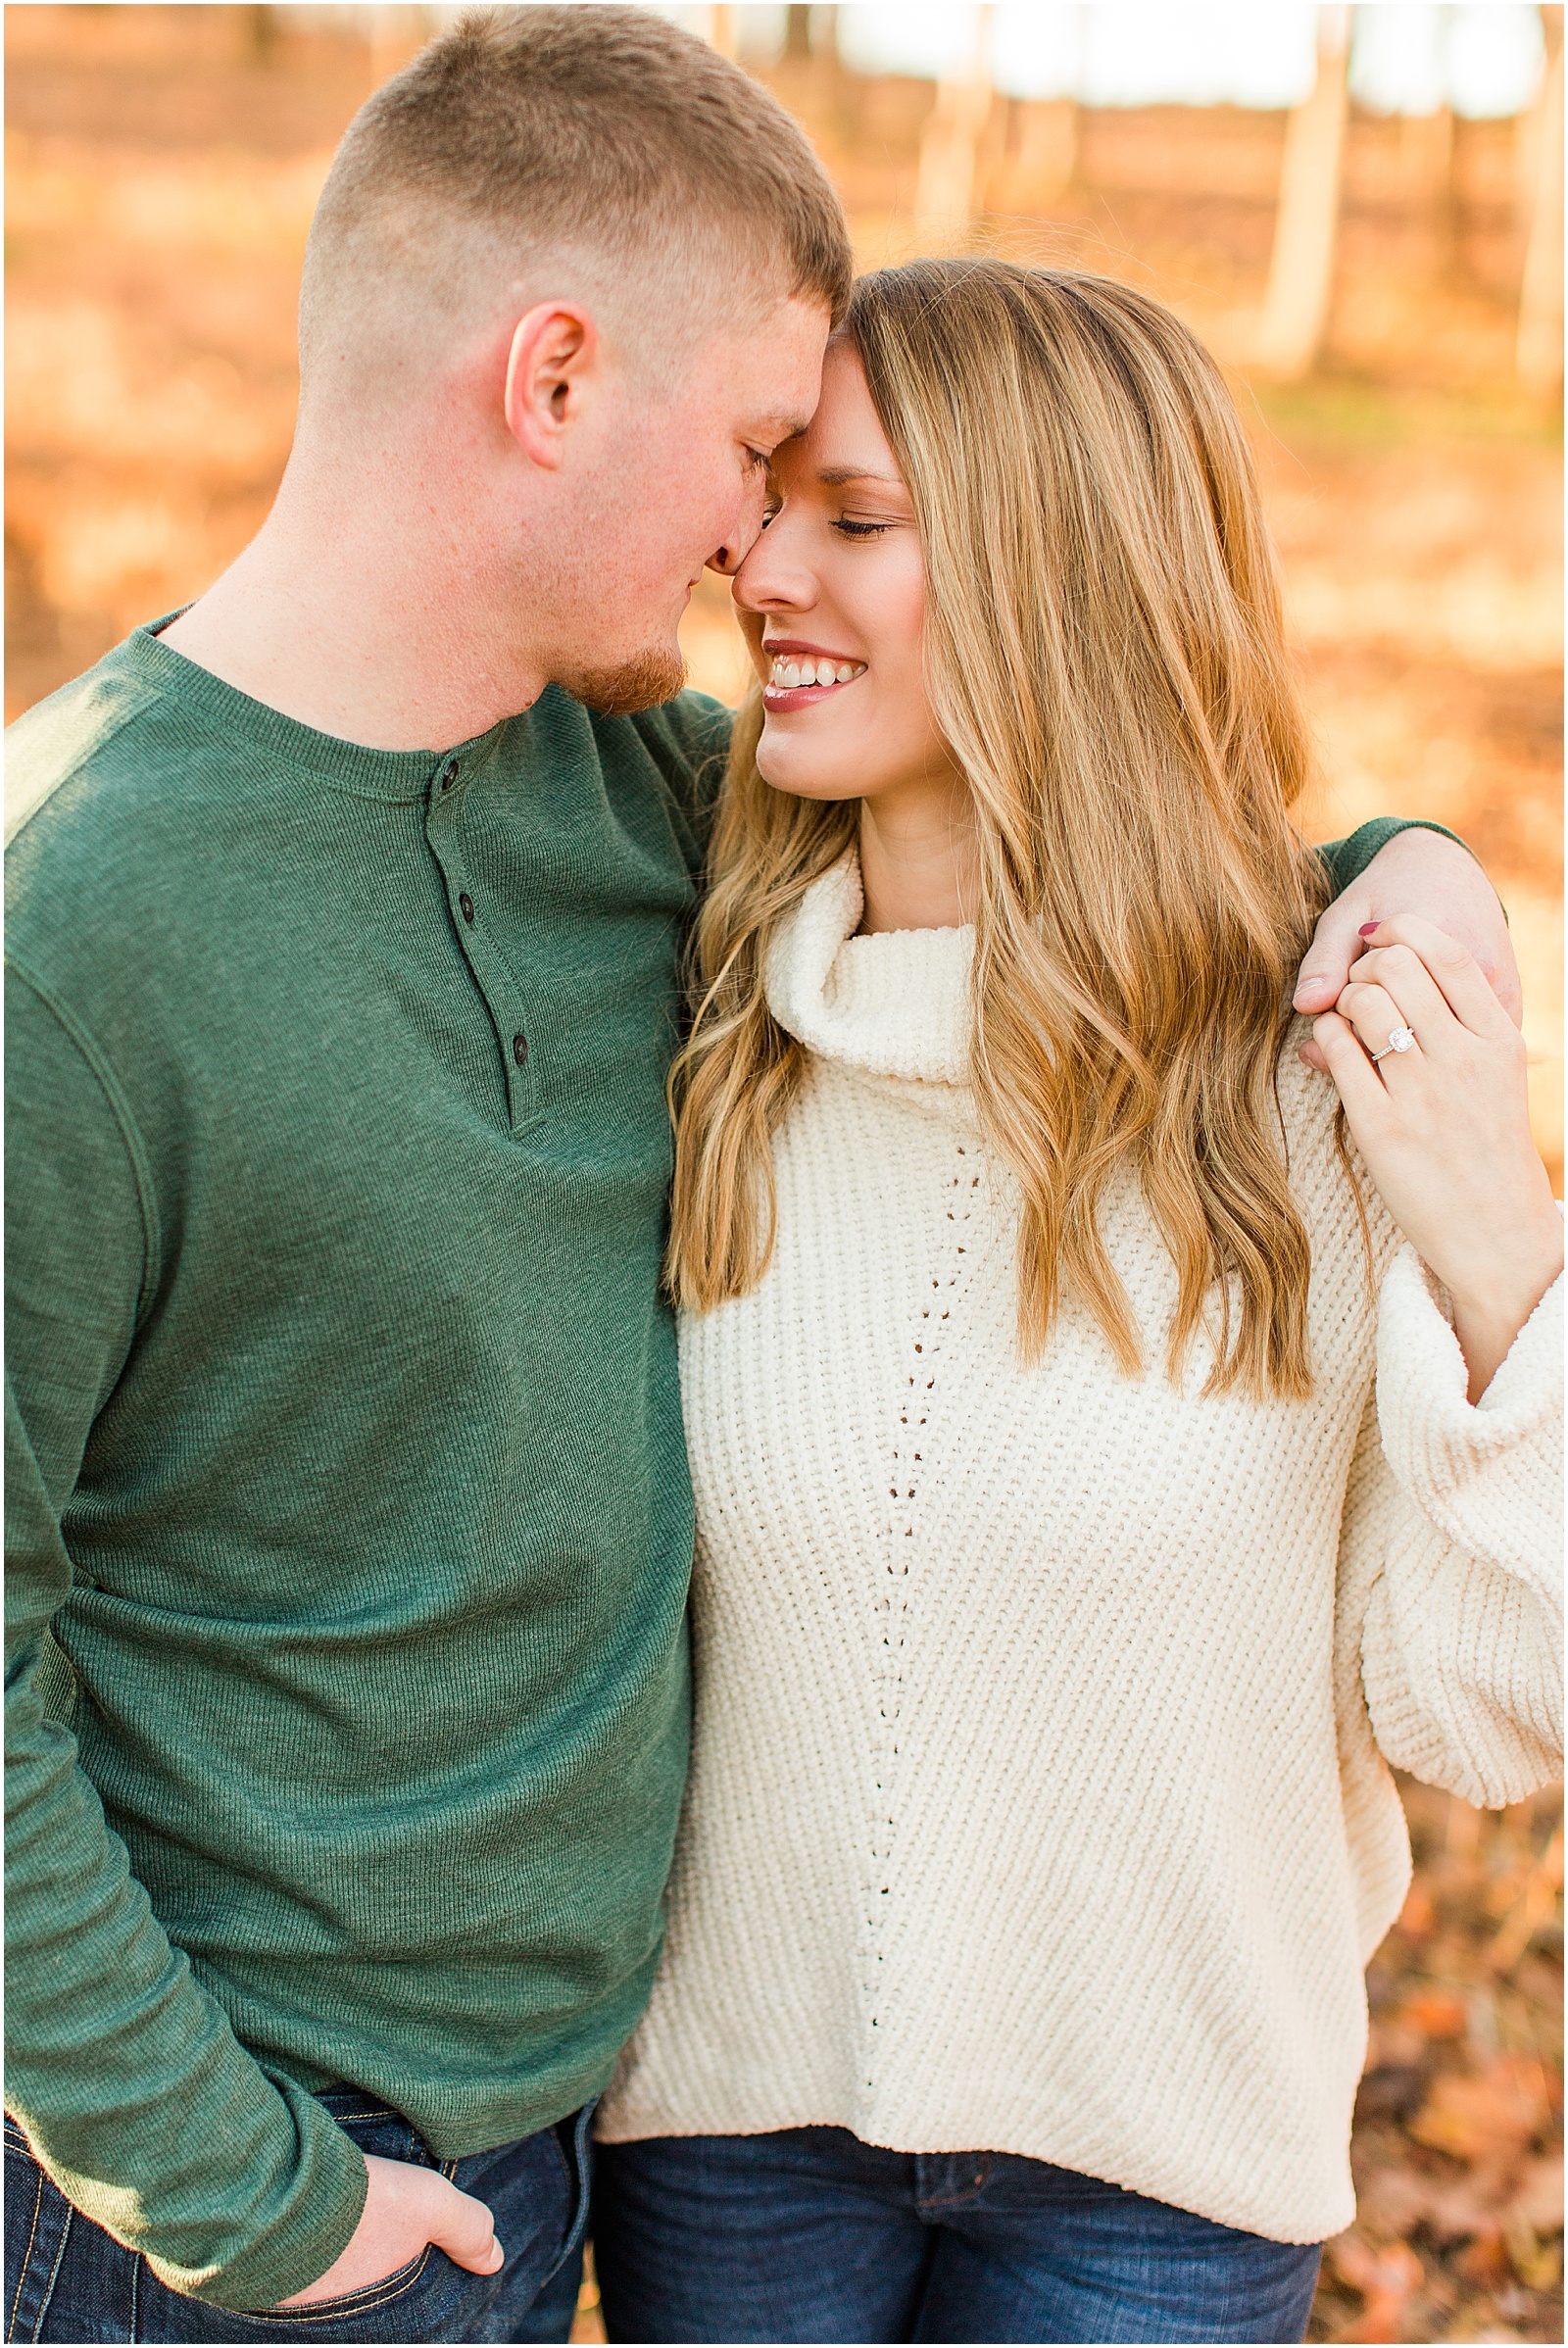 A Fall Southern Indiana Engagement Seesion | Cody and Hannah | Bret and Brandie Photography 023.jpg